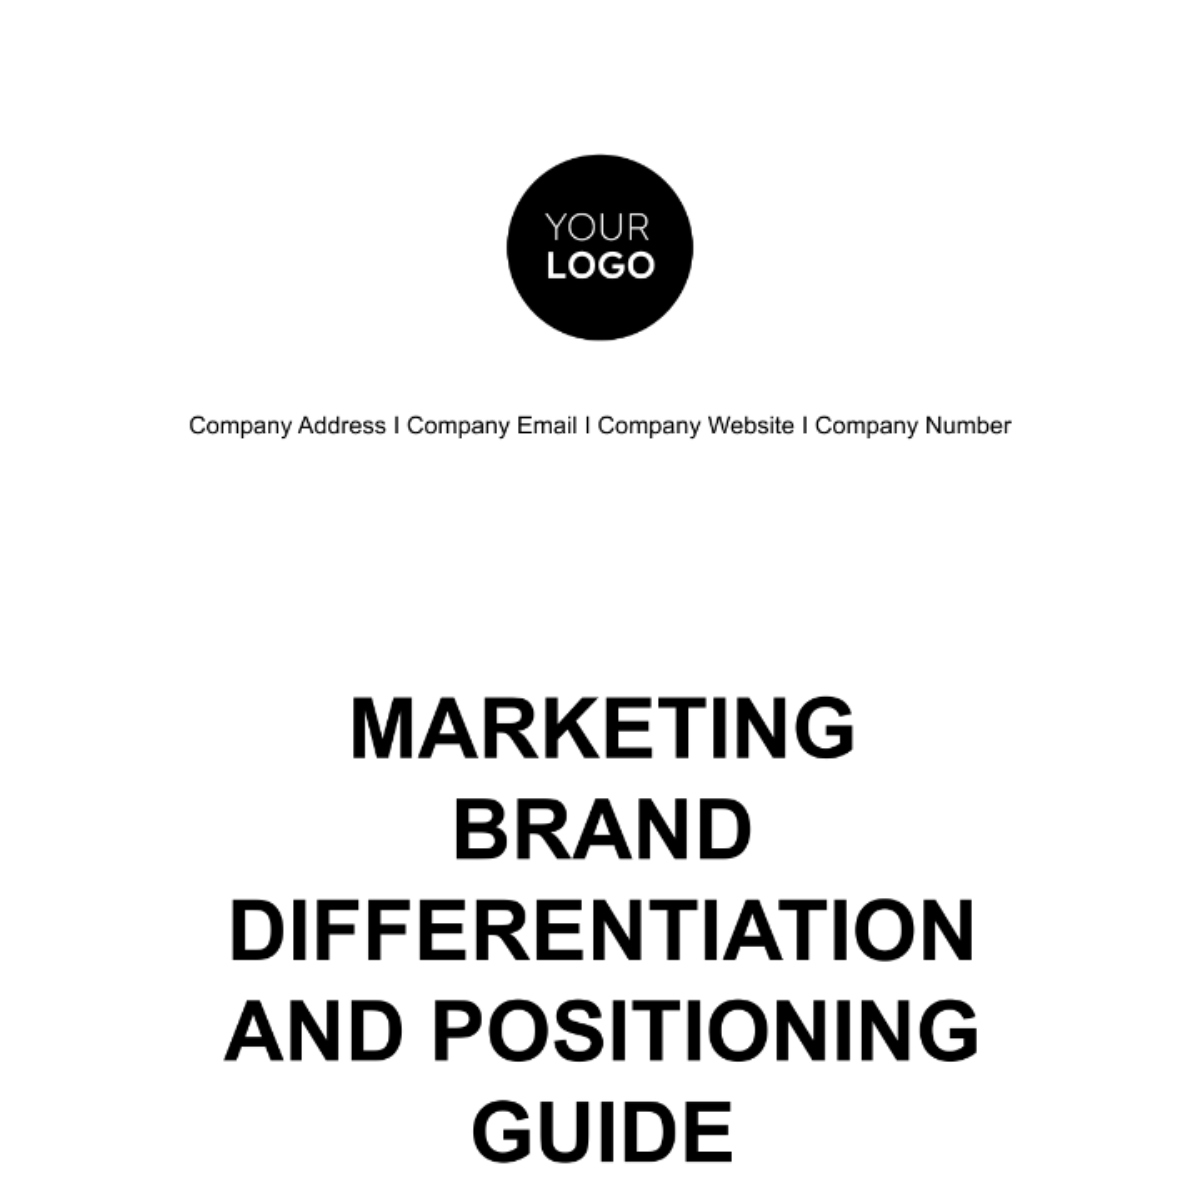 Marketing Brand Differentiation and Positioning Guide Template